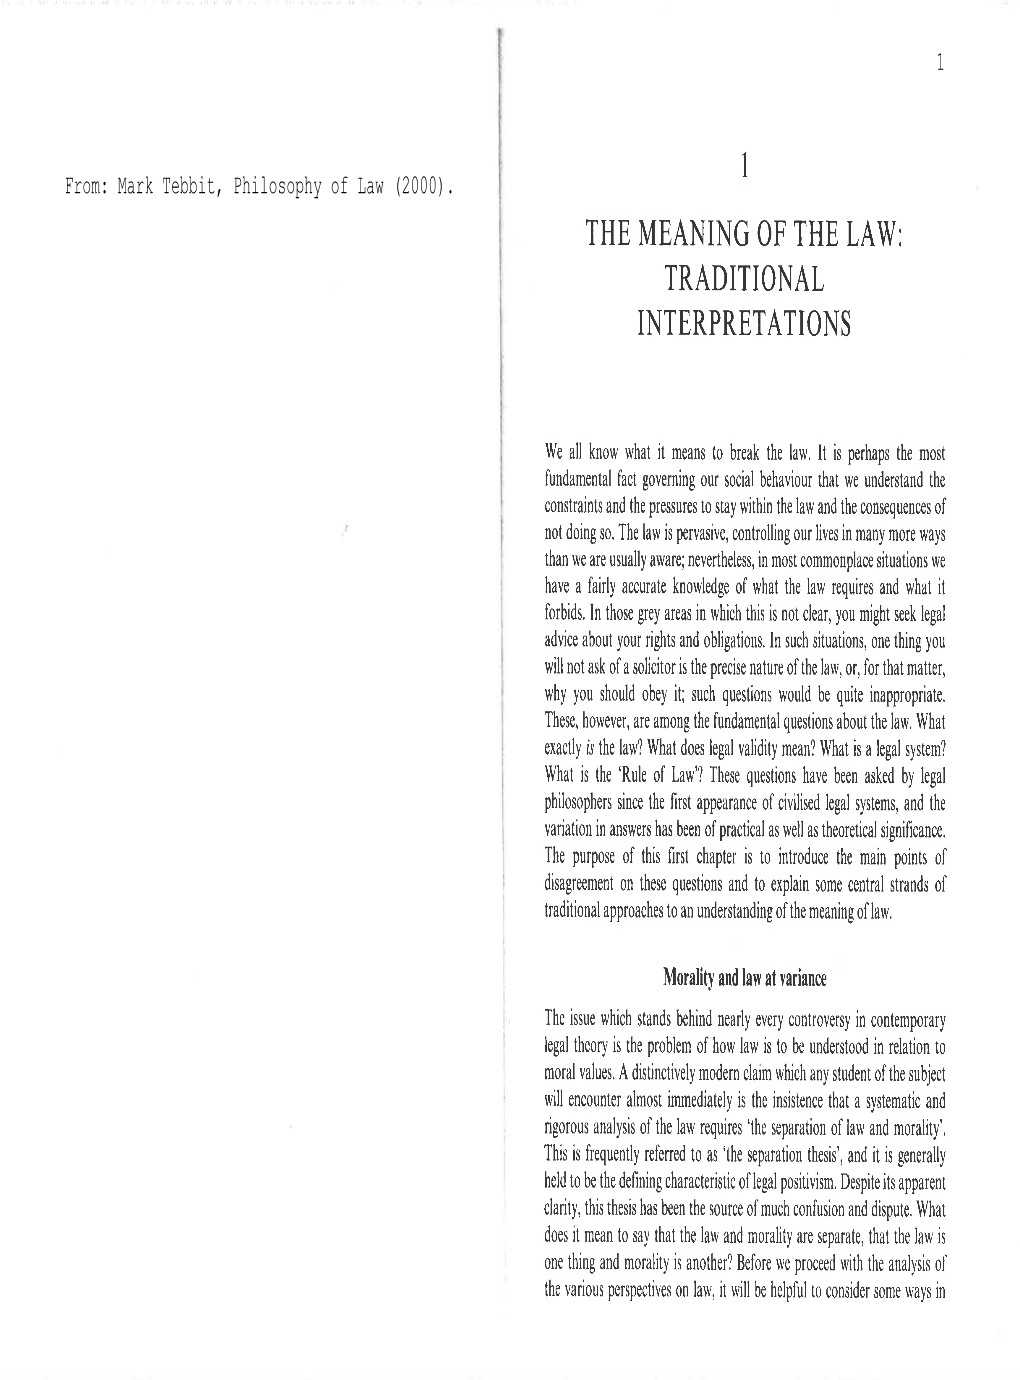 The Meaning of the Law: Traditional Interpretations